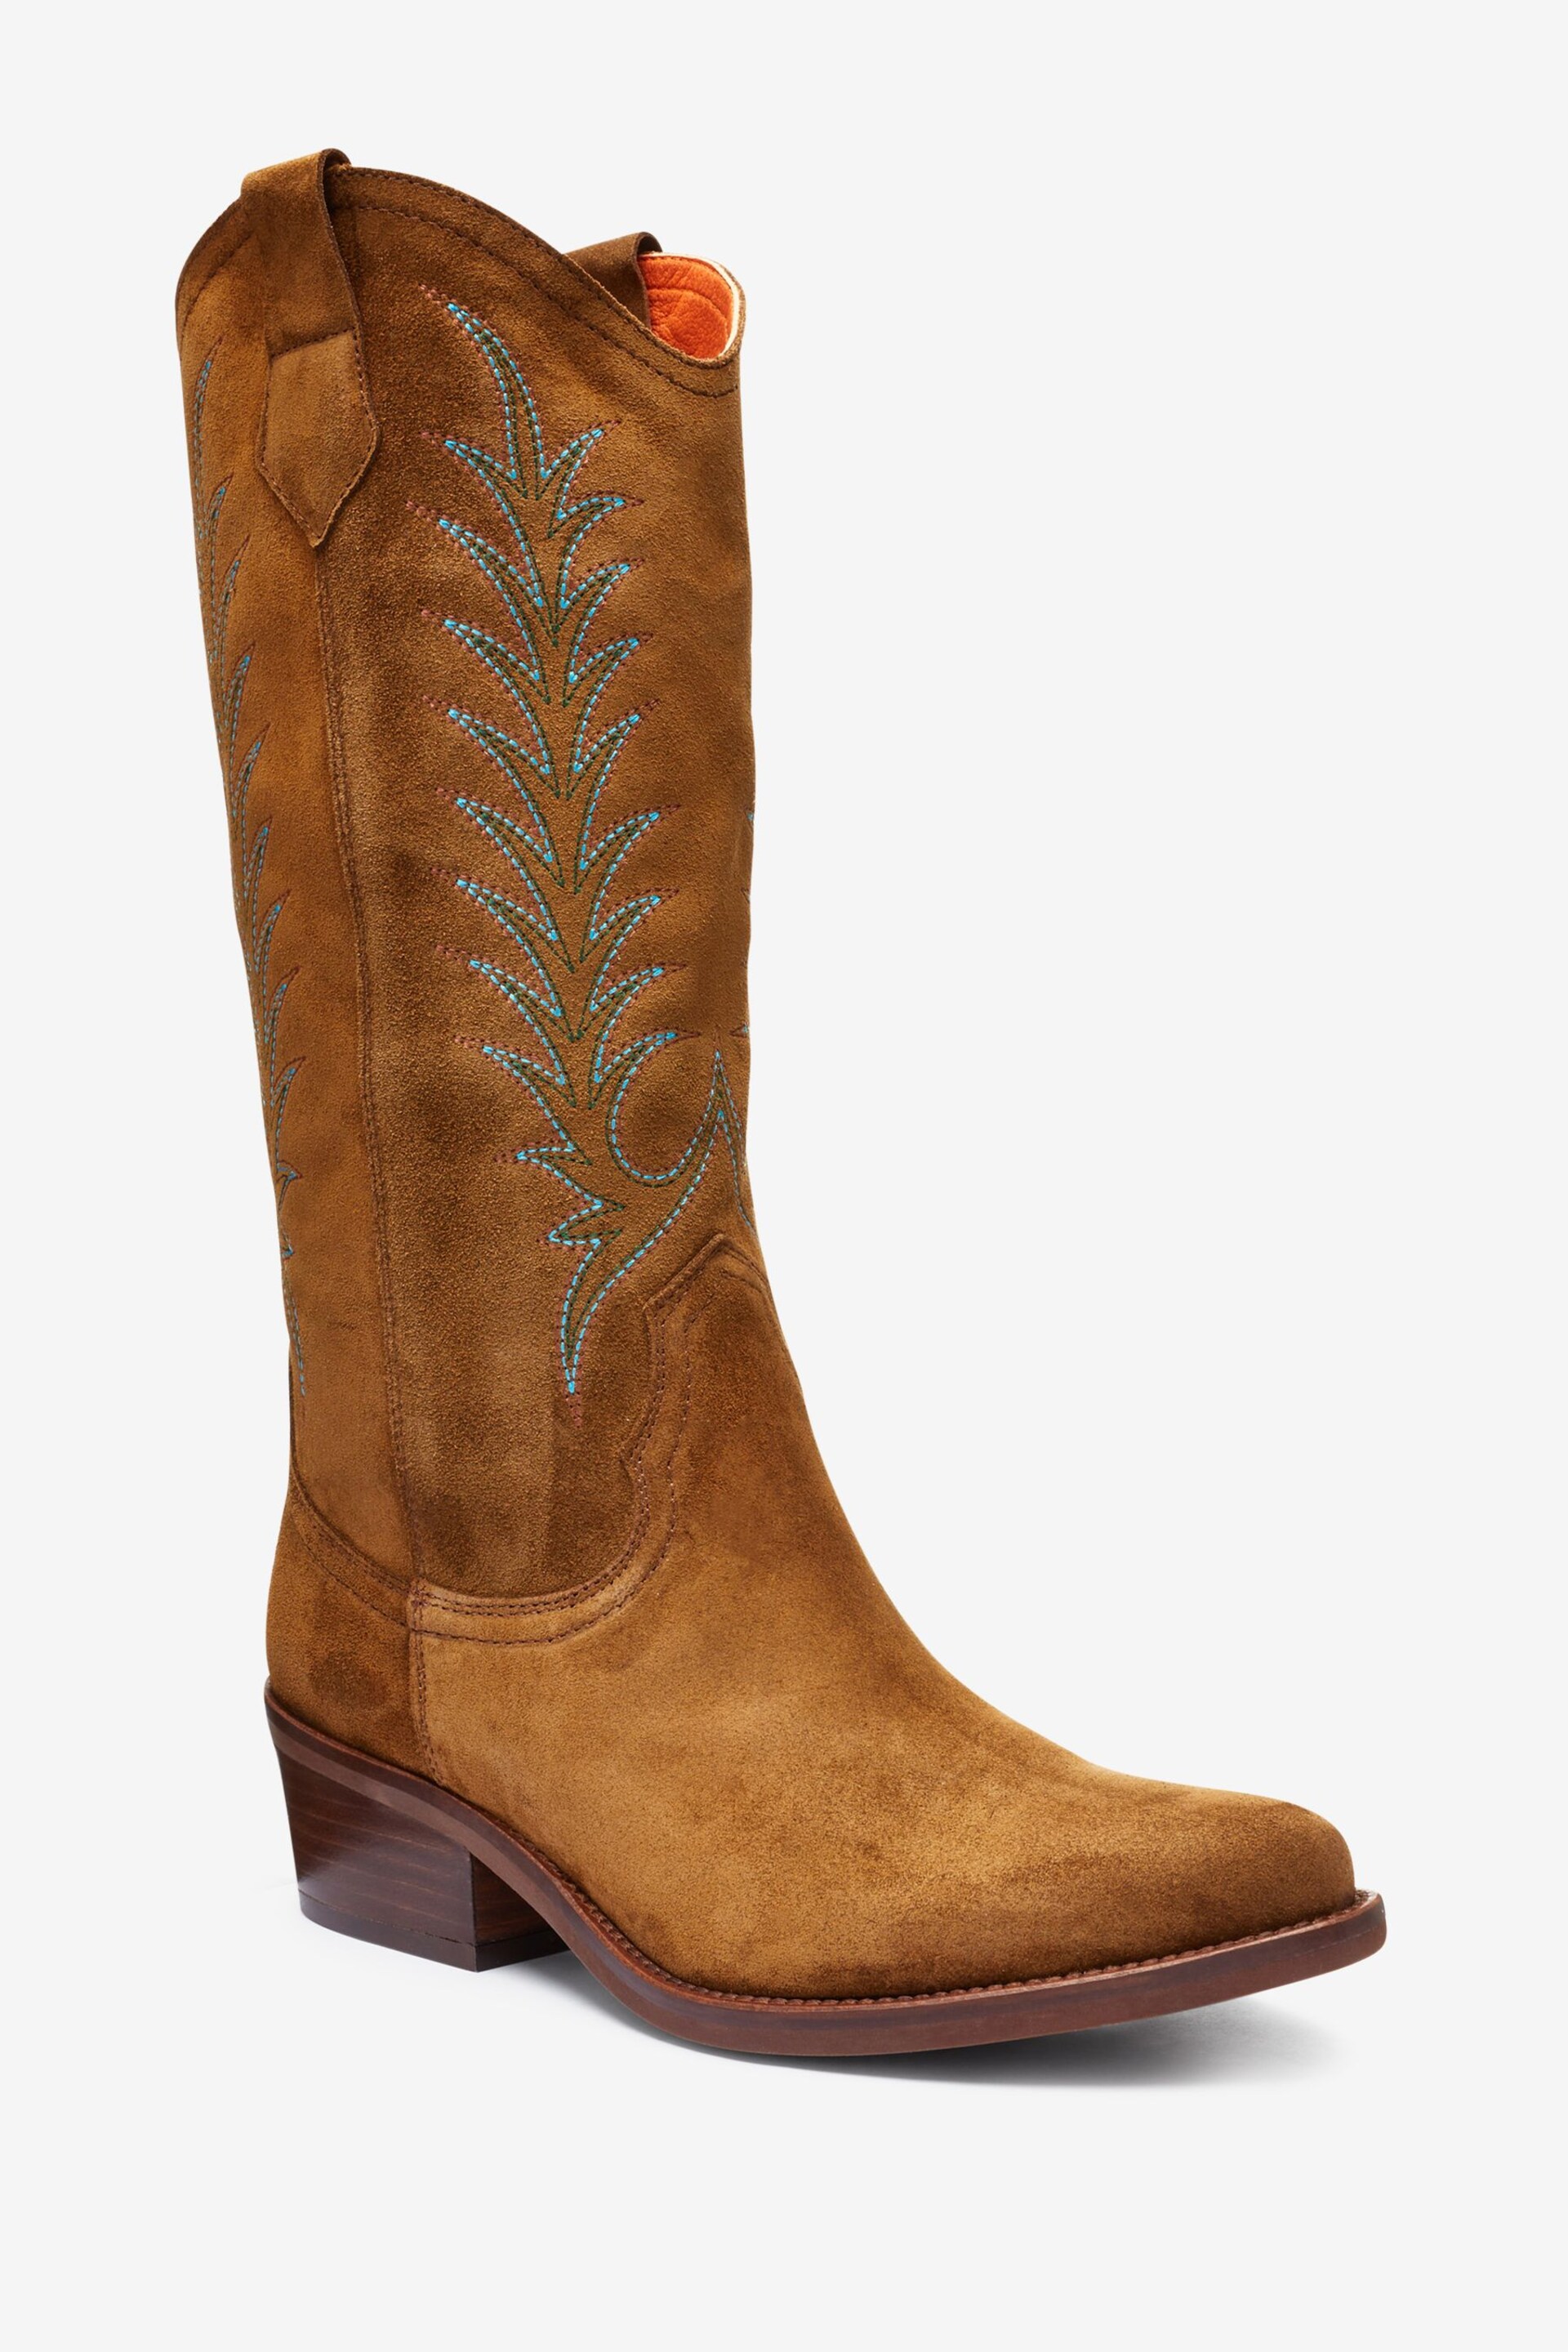 Penelope Chilvers Goldie Embroidered Cowboy Brown Boots - Image 10 of 16